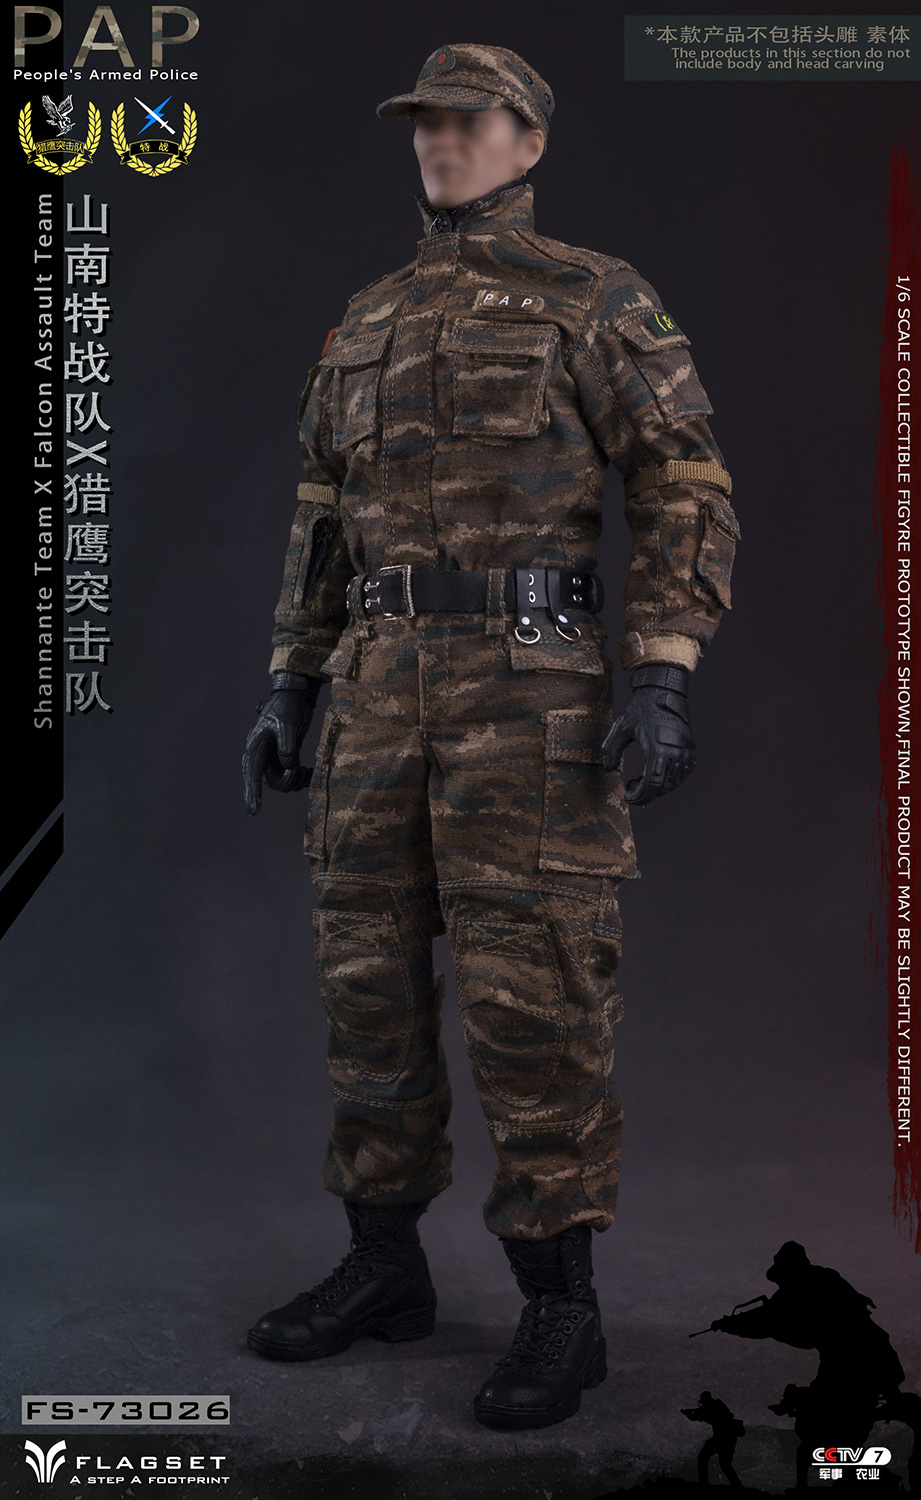 ArmedPolice - NEW PRODUCT: Flagset: 1/6 Chinese armed police special team - Shannan detachment / Falcon commando Wudong camouflage suit (FS73026#) 01105311